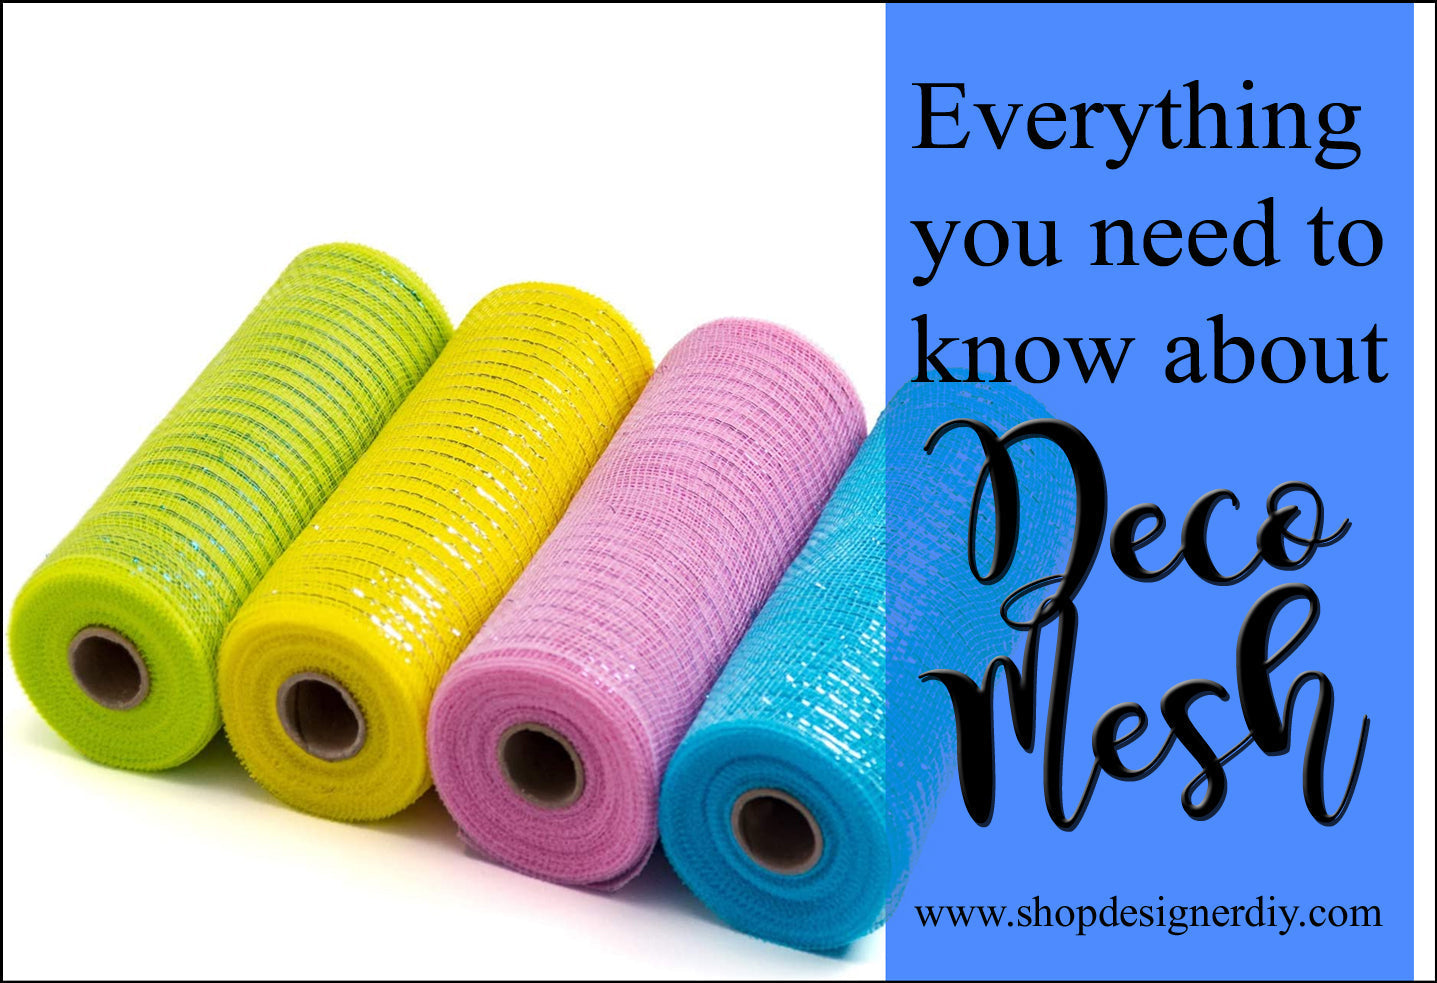 Everything you need to know about types of deco mesh!